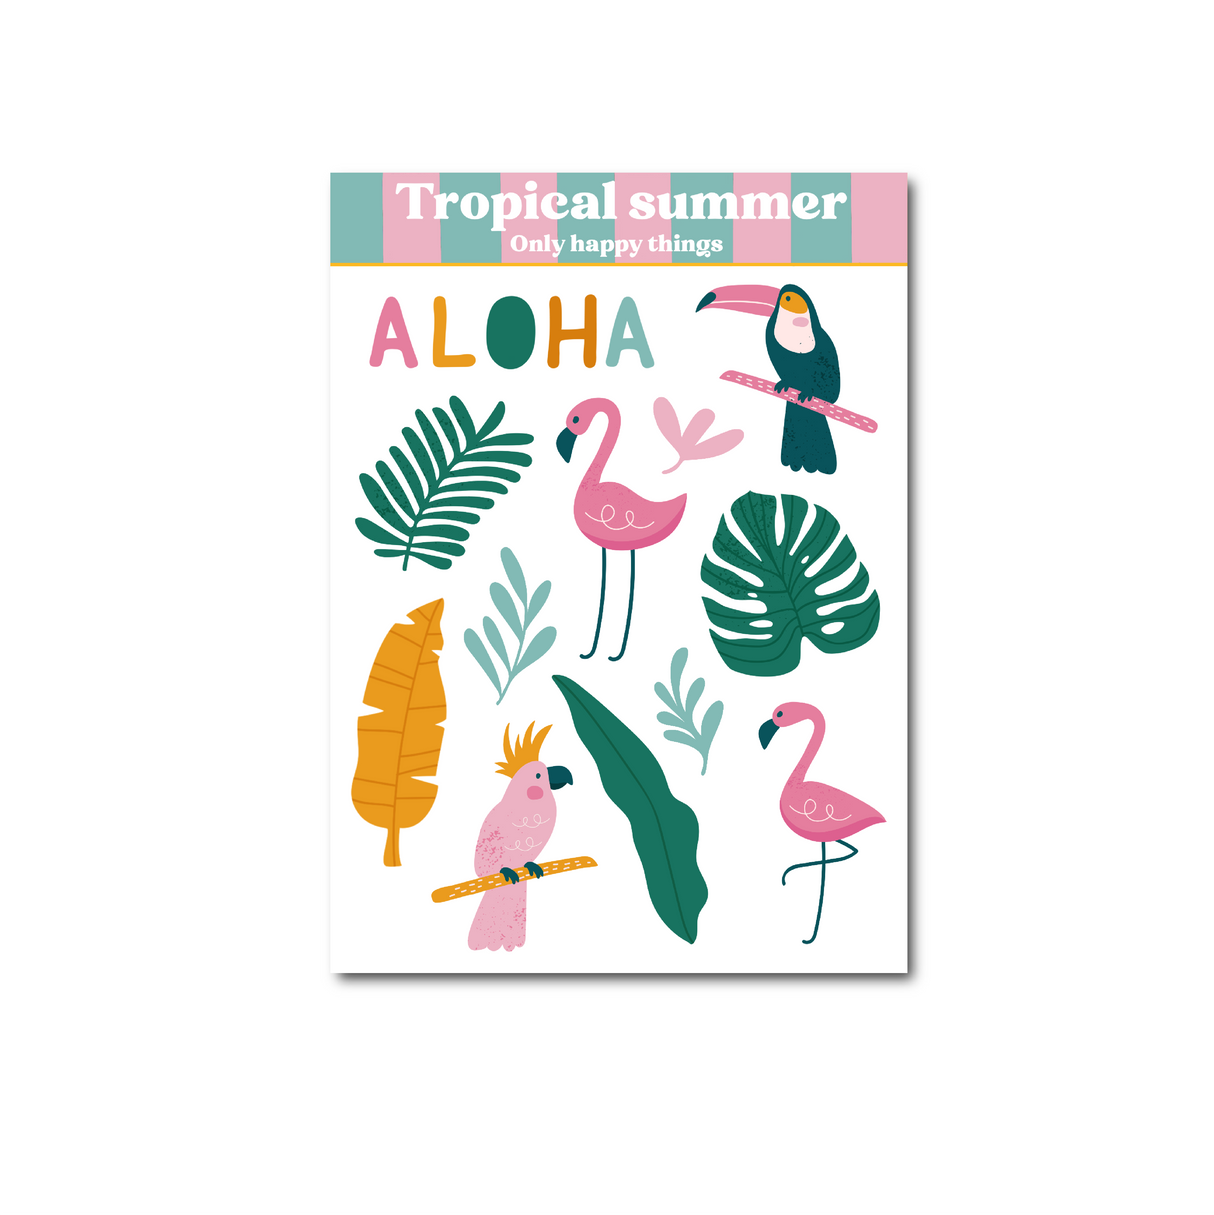 Tropical Summer Sticker Sheet with palm trees, flamingo, parrots, leaf's and aloha slogan